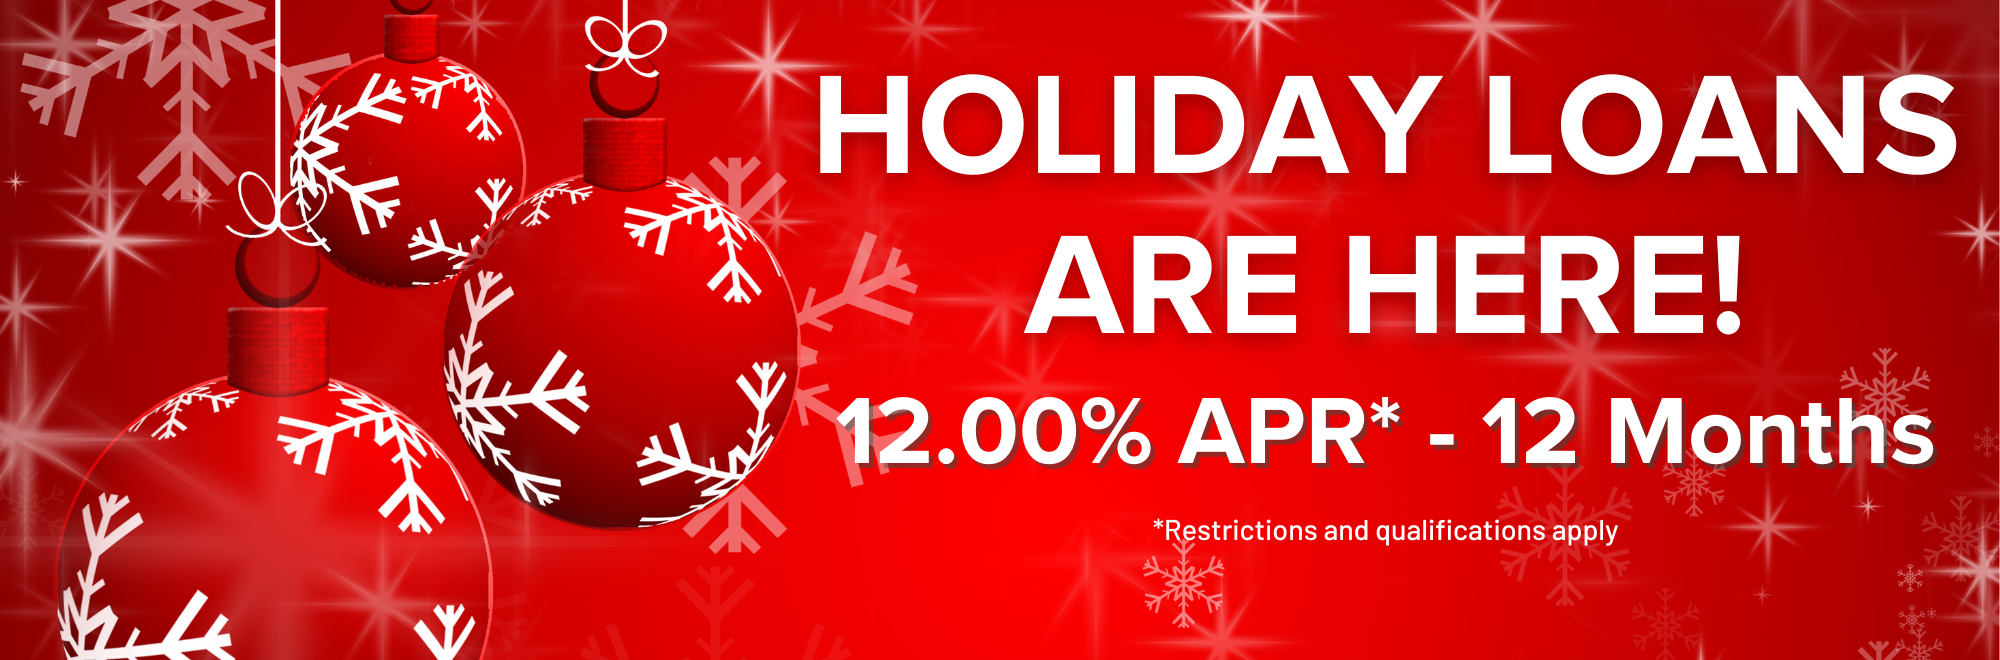 Holiday Loans are Here! Apply Online Today.